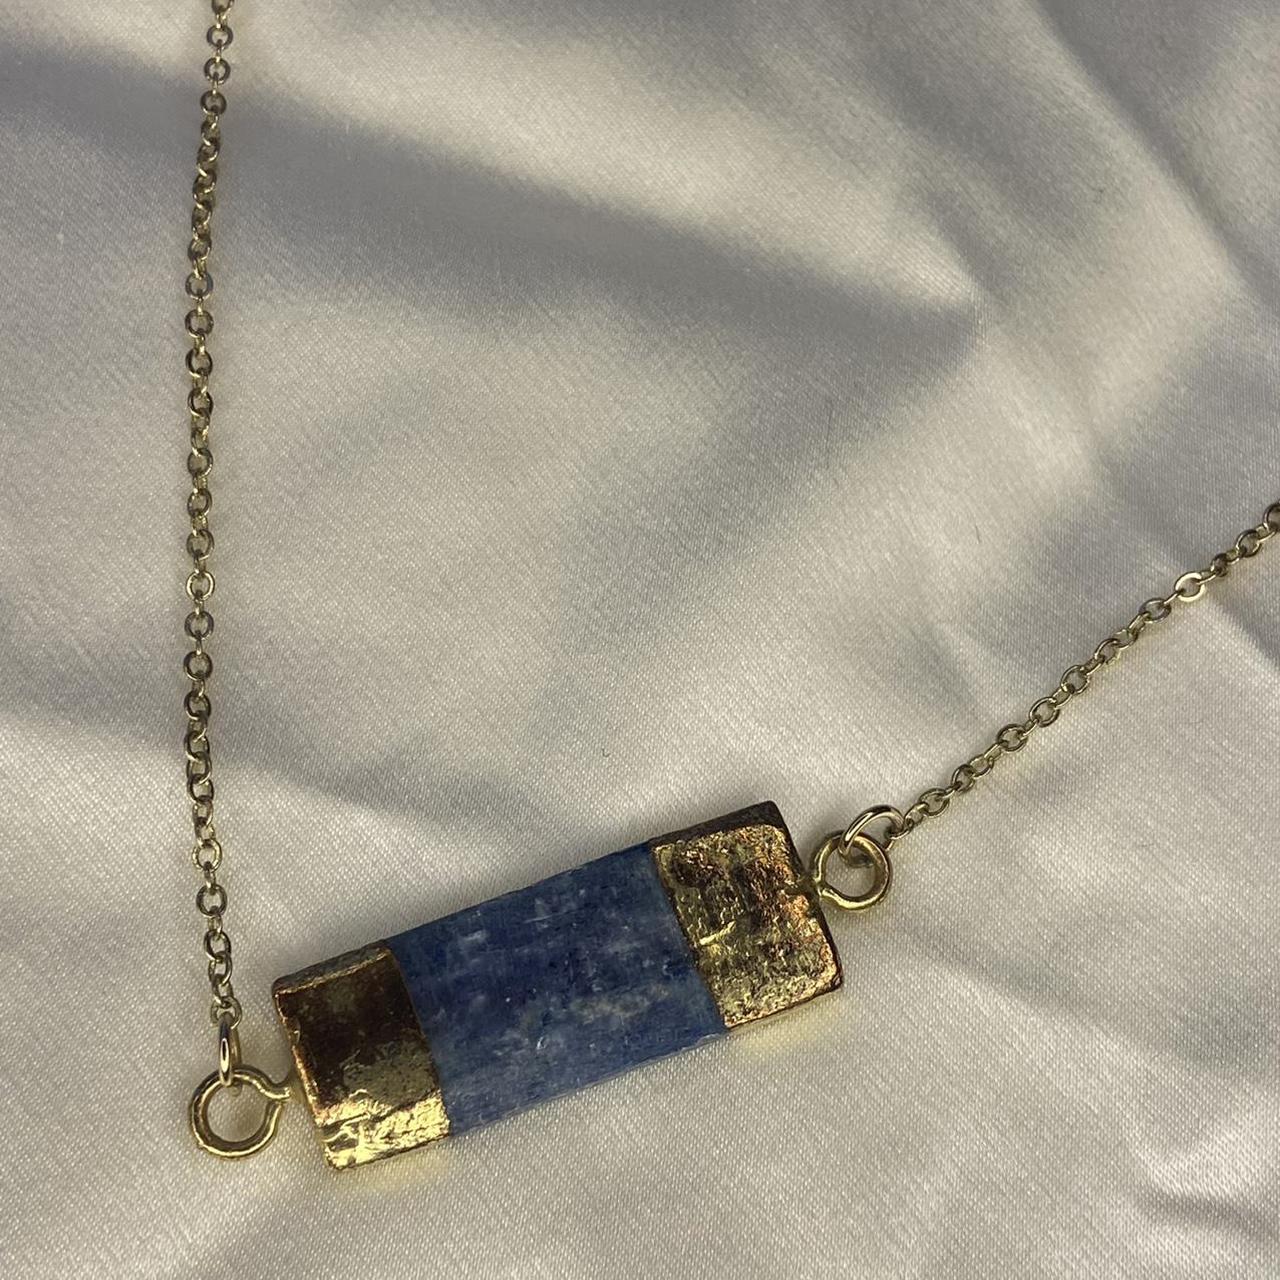 Product Image 2 - Gold chain blue stone pendant